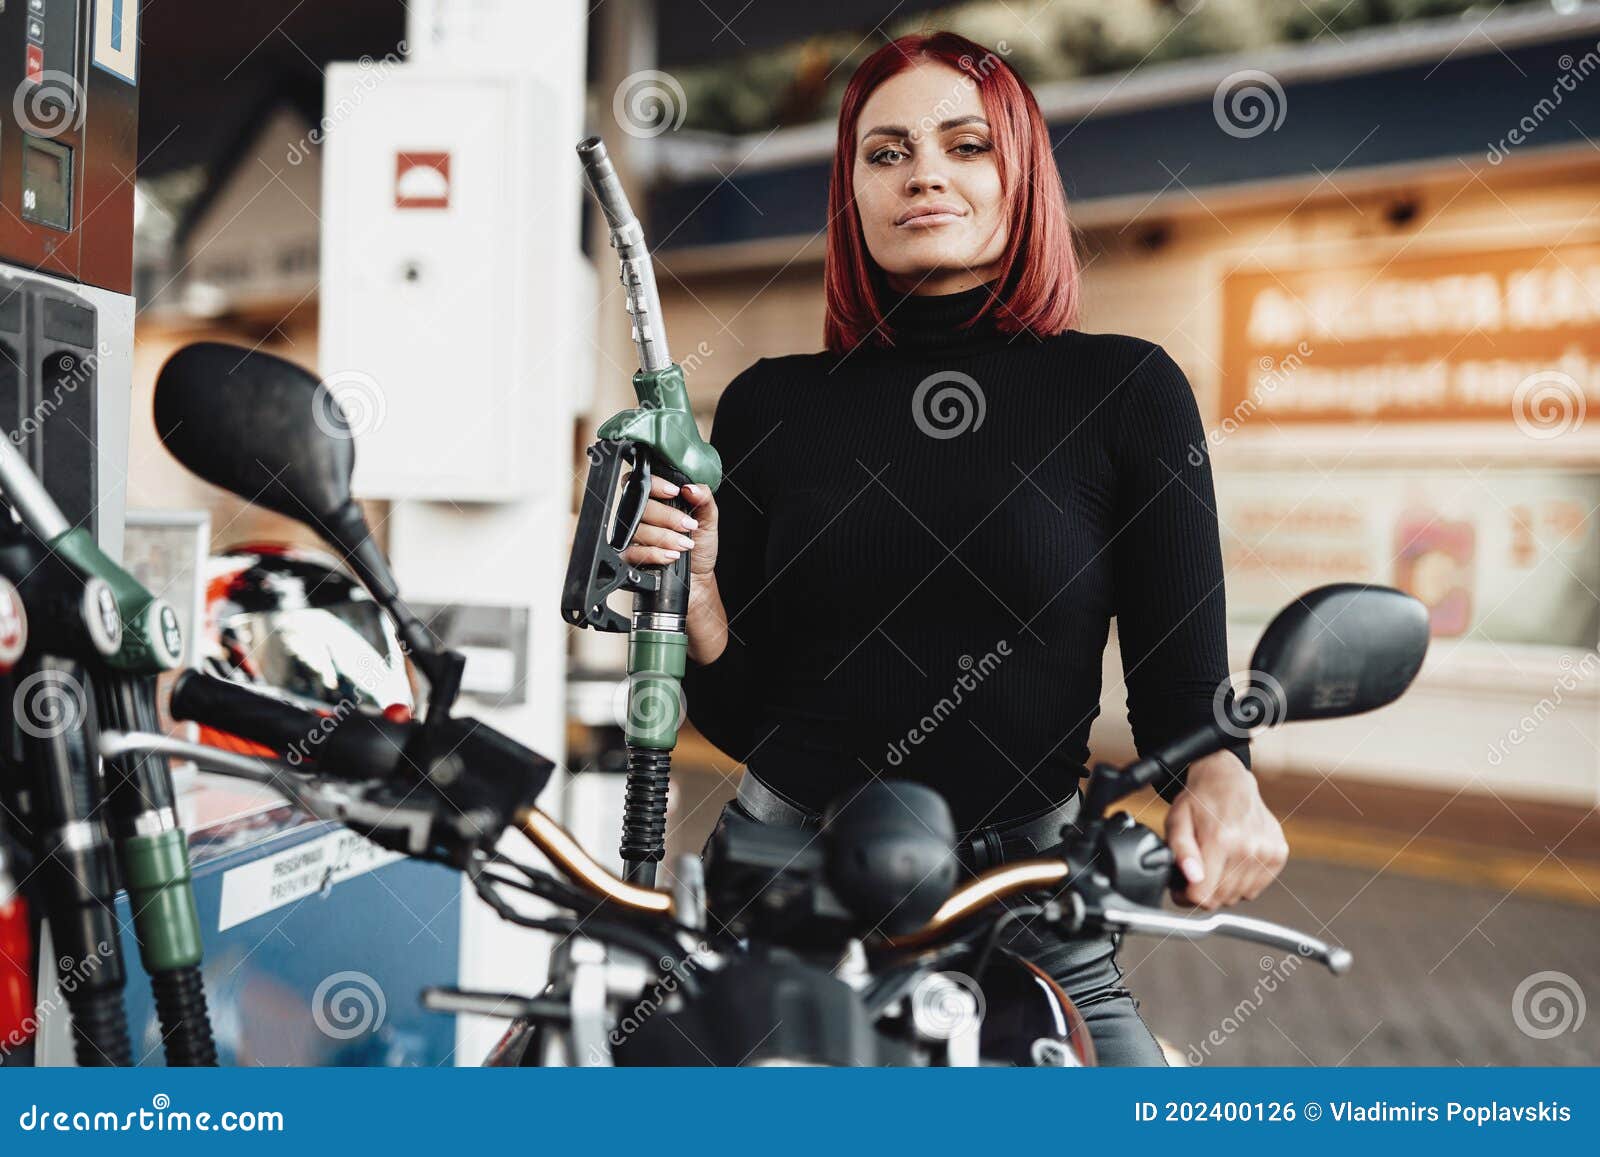 Beauty Young Girl is Sitting on Her Bike in Gas Station Stock Photo - Image  of fashion, cute: 202400126